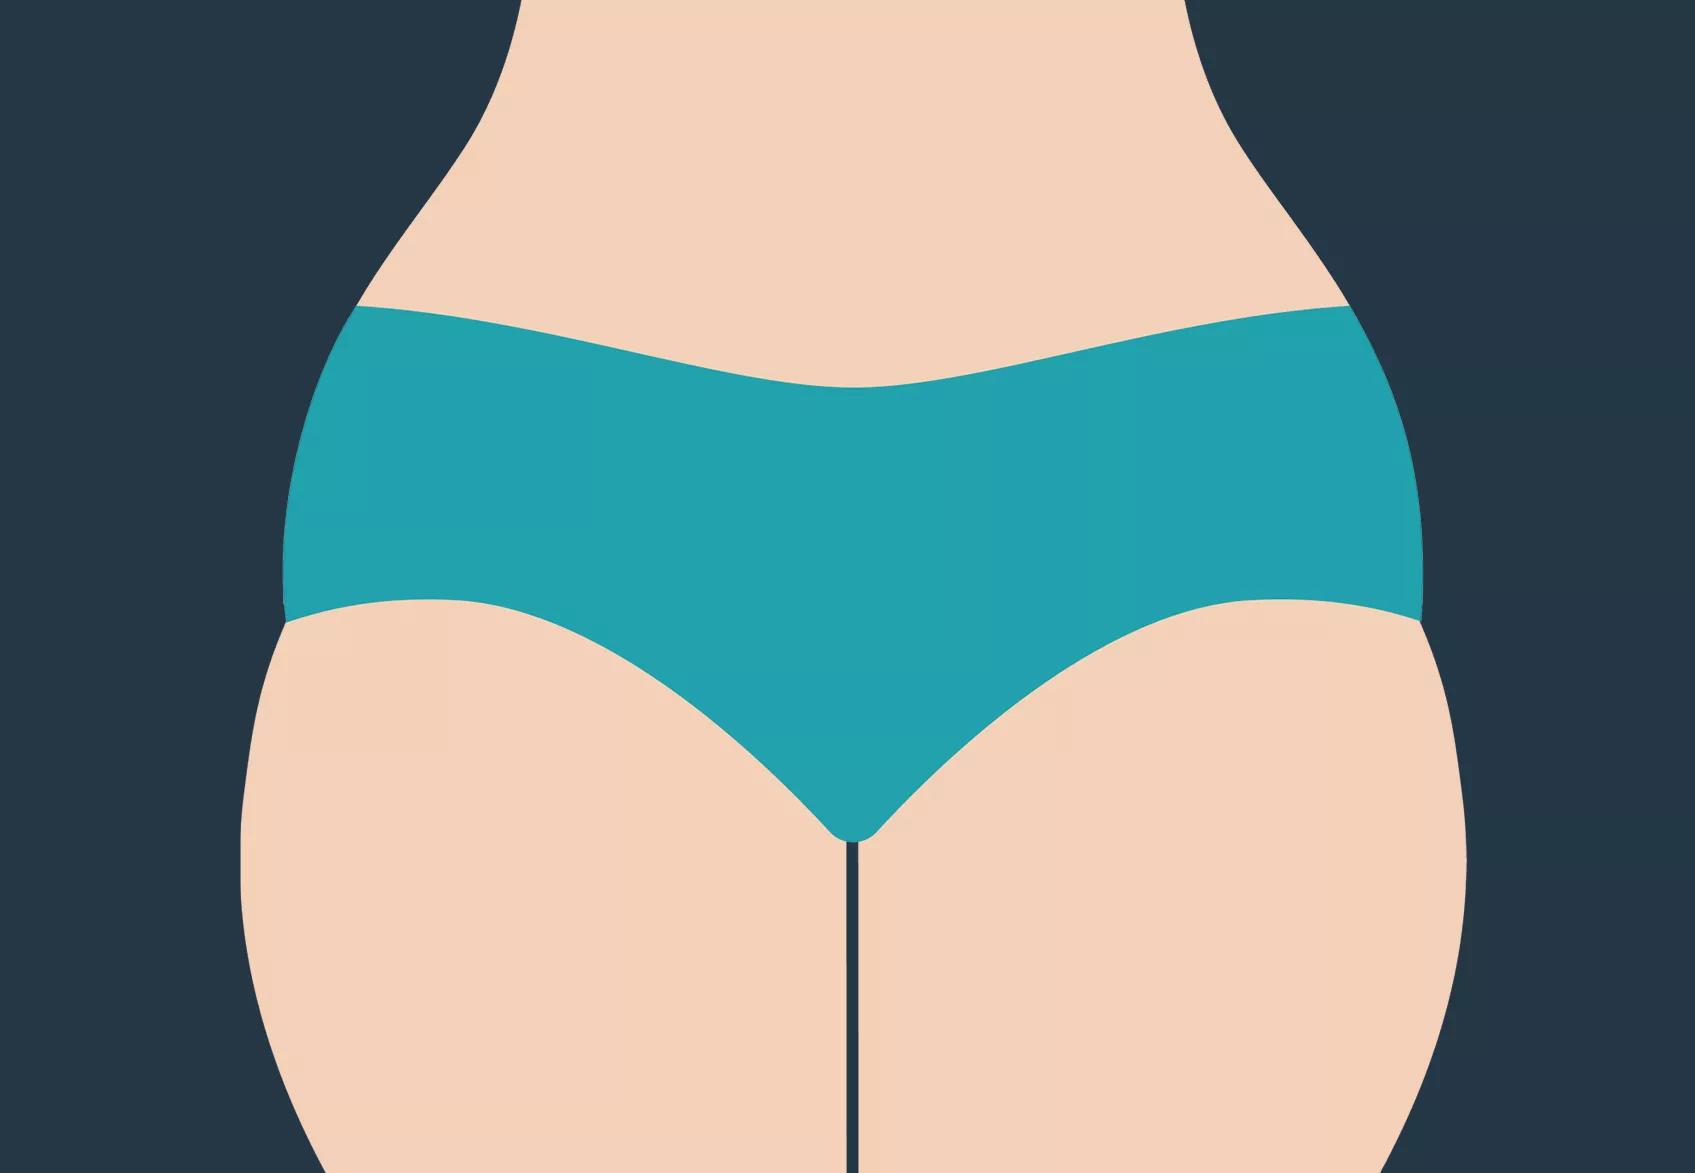 Lipoedema: The Condition You May Not Realise You Have and How to Treat it  “Liposuction